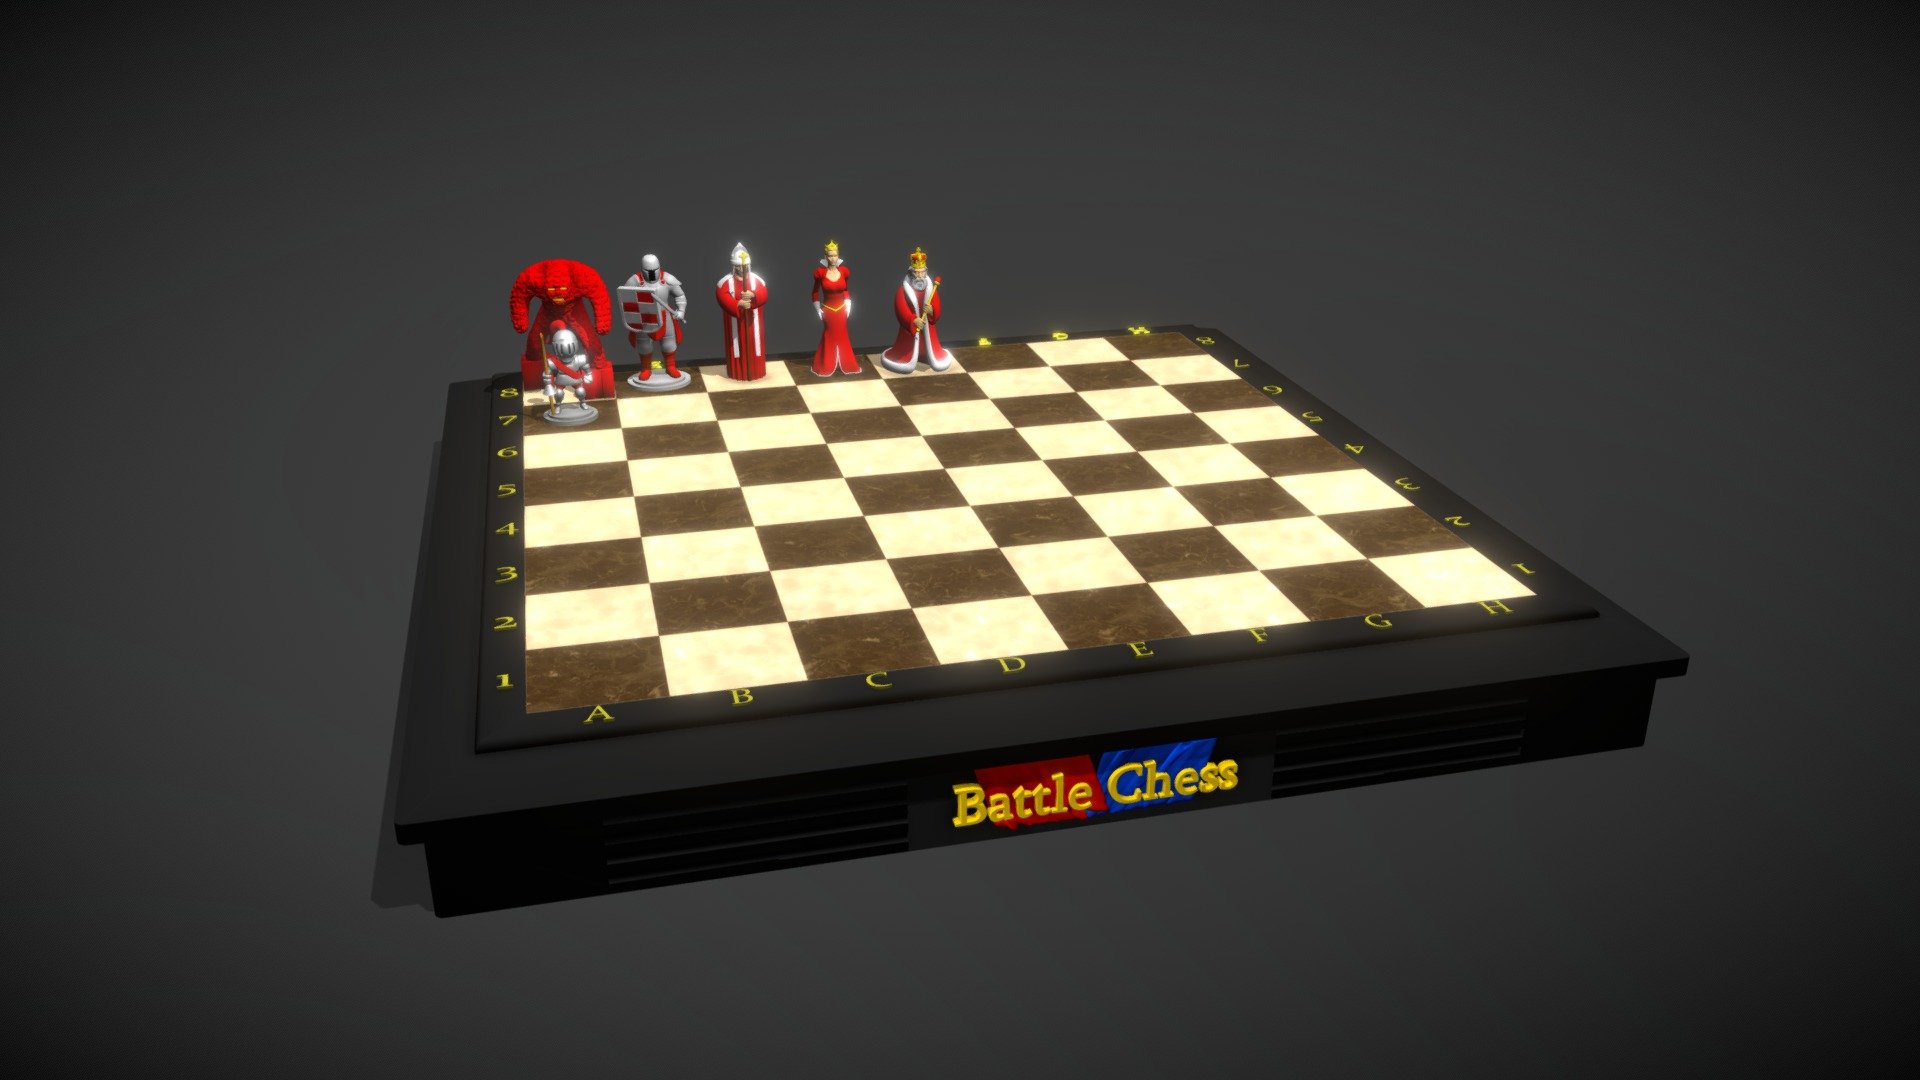 Get your 3D printable chess set based on the BATTLE CHESS game from Interplay (1989)

Since Blue and Red players share identical models, there are 6 models included to print that number of times: 

-KING x2
-QUEEN x2
-BISHOP x4 
-KNIGHT x4 
-ROOK x4
-PAWN x16


BOARD (8 parts)

We recommend to print in red / blue PLA with tree support for all characters (faster and more reliable) then paint other colors with Enamel paints.
+ Black PLA for board.

HOW TO PRINT THE MAIN BOARD 
The board is made from 4 printed parts for the main frame (no Glue, T shape assemble) 
+ 4 parts for the alpha-numeric frame 
+ 1 flat grid (not to be printed, we recommend to 2D the checkerboard picture included and stick it onto a 1mm steel plate, apply a varnish coat to protect it from scratches.

Dimension: anything you want since these are HiRes models, keep in mind a 30x30 cm checker grid will allow printing the outside thick frame into a 30x30 cm bed plate area (diagonally) 3d model